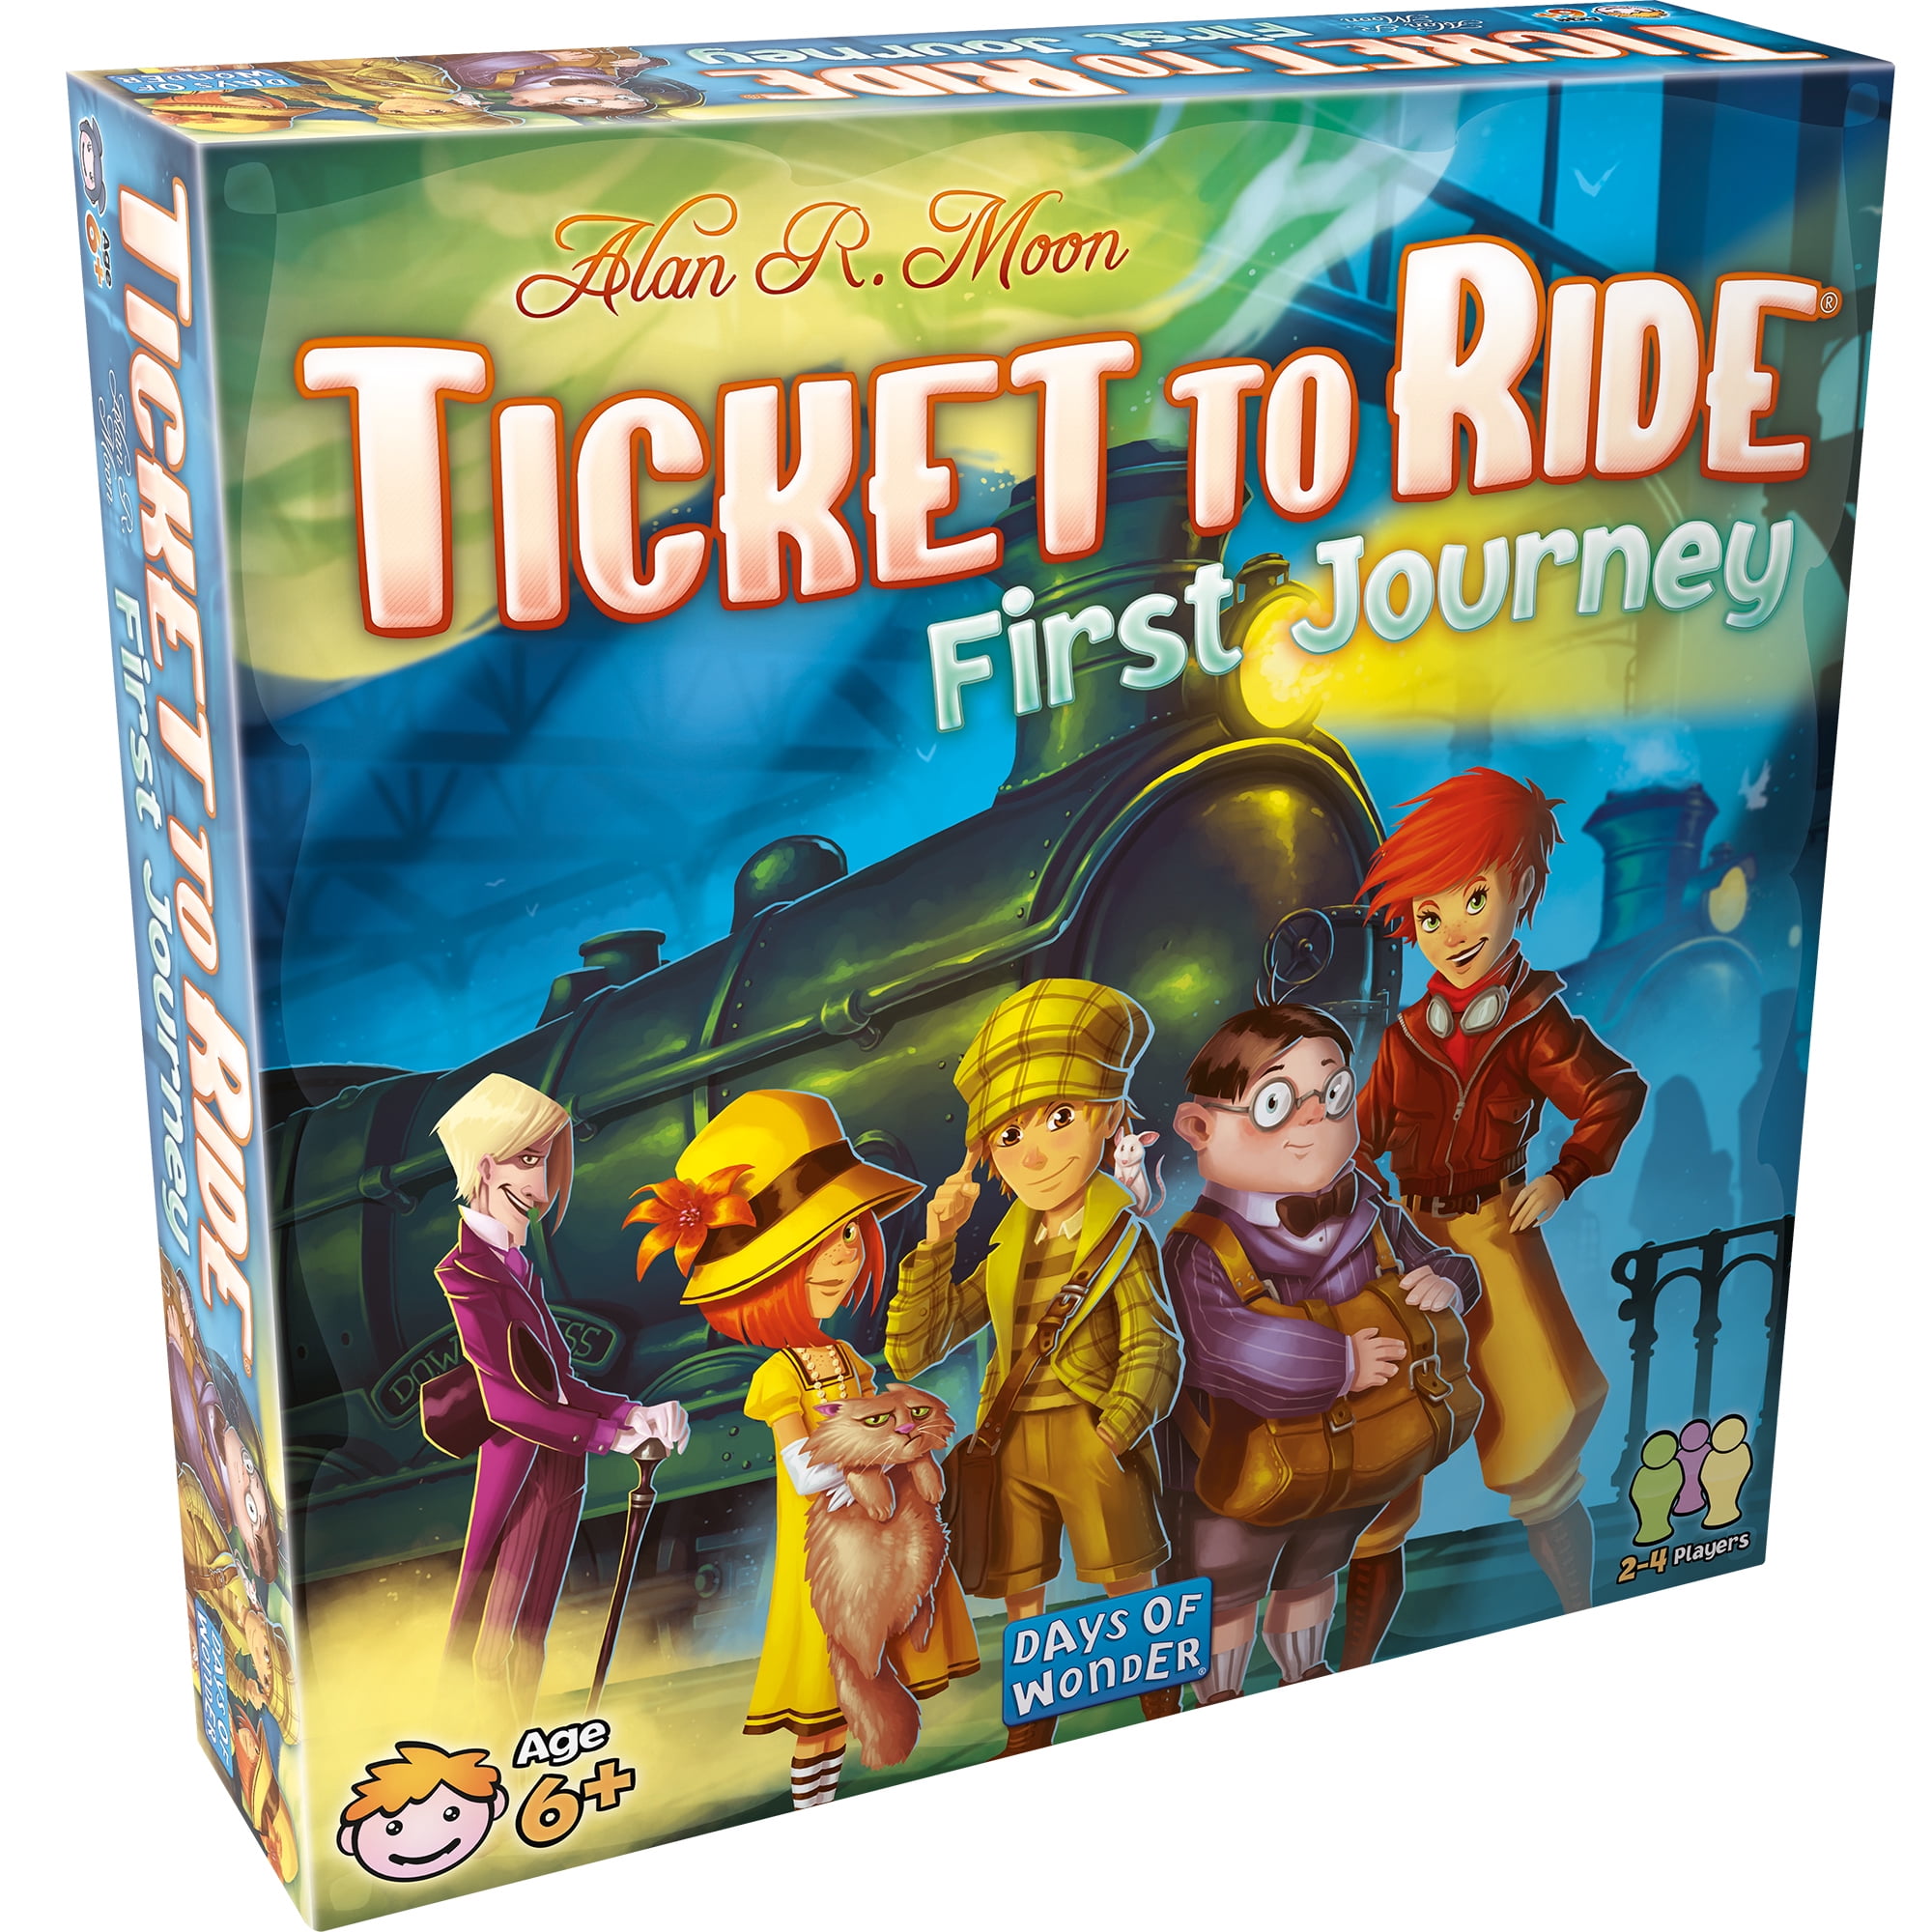 Board Game Reviews by Josh: Ticket to Ride Review